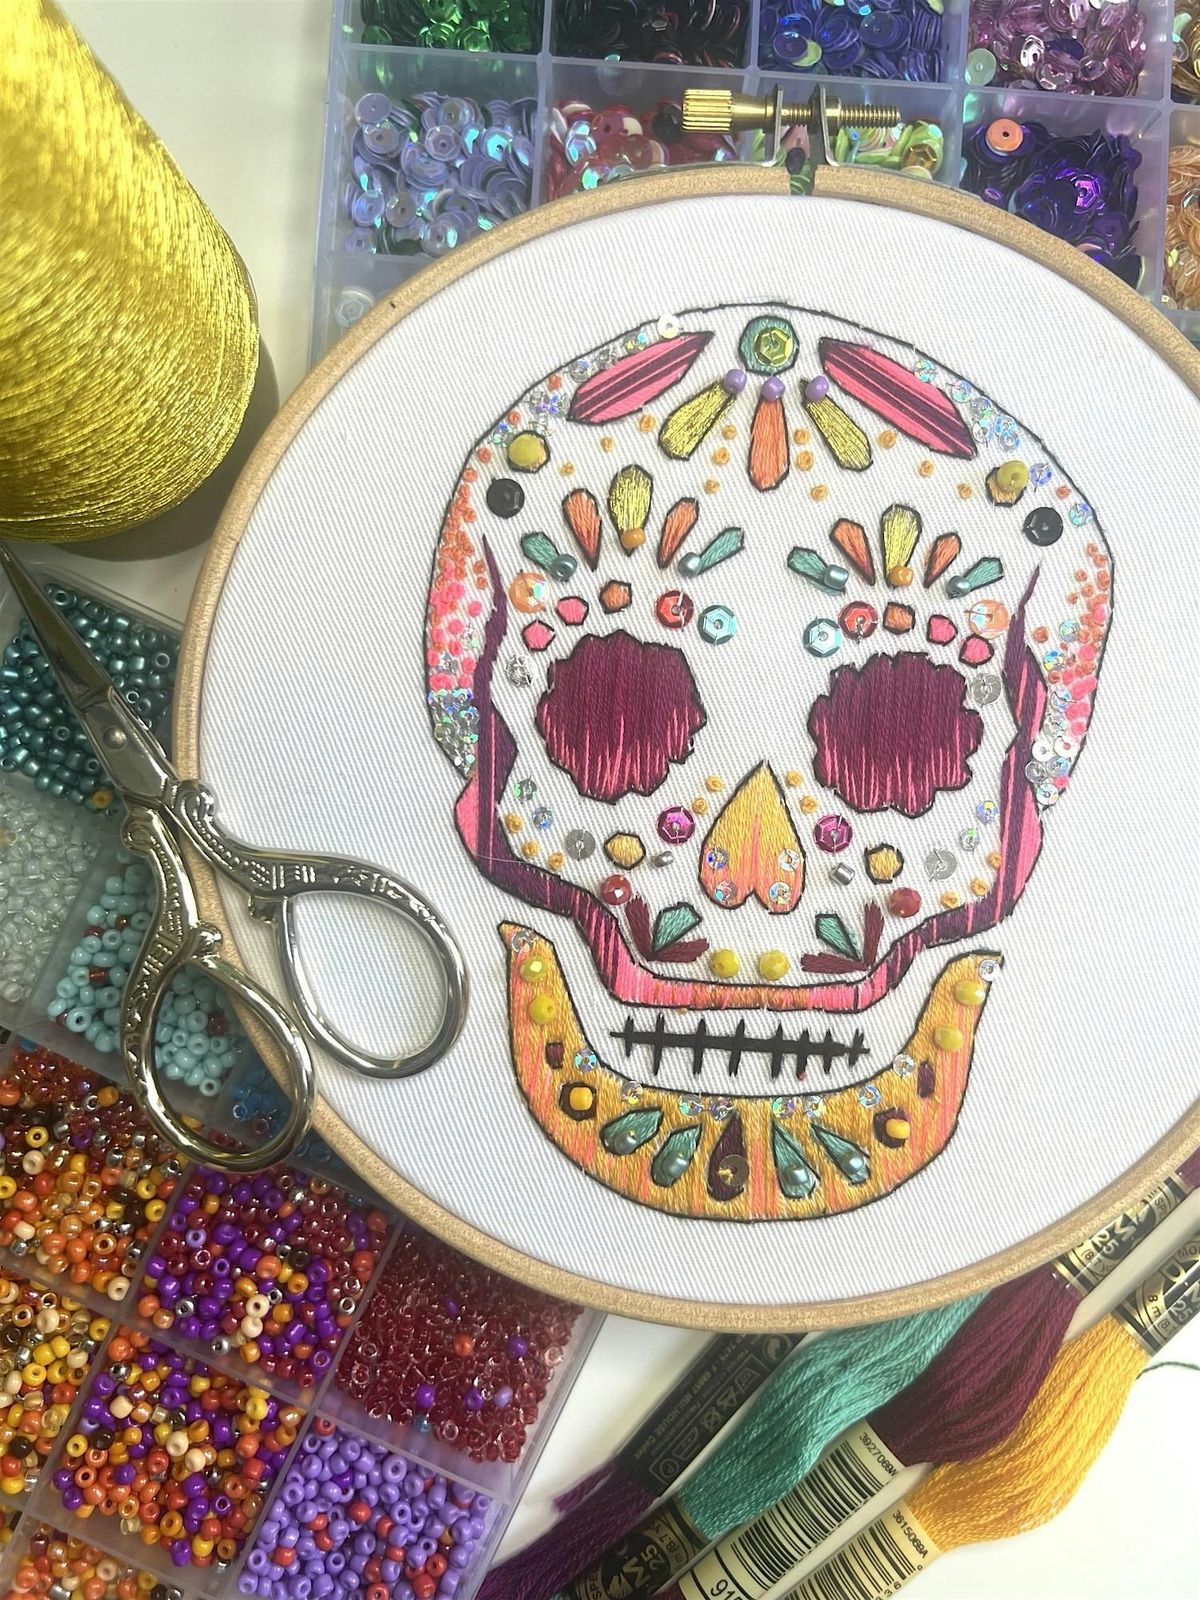 Halloween Embroidery Workshop at The Green Man, Putney